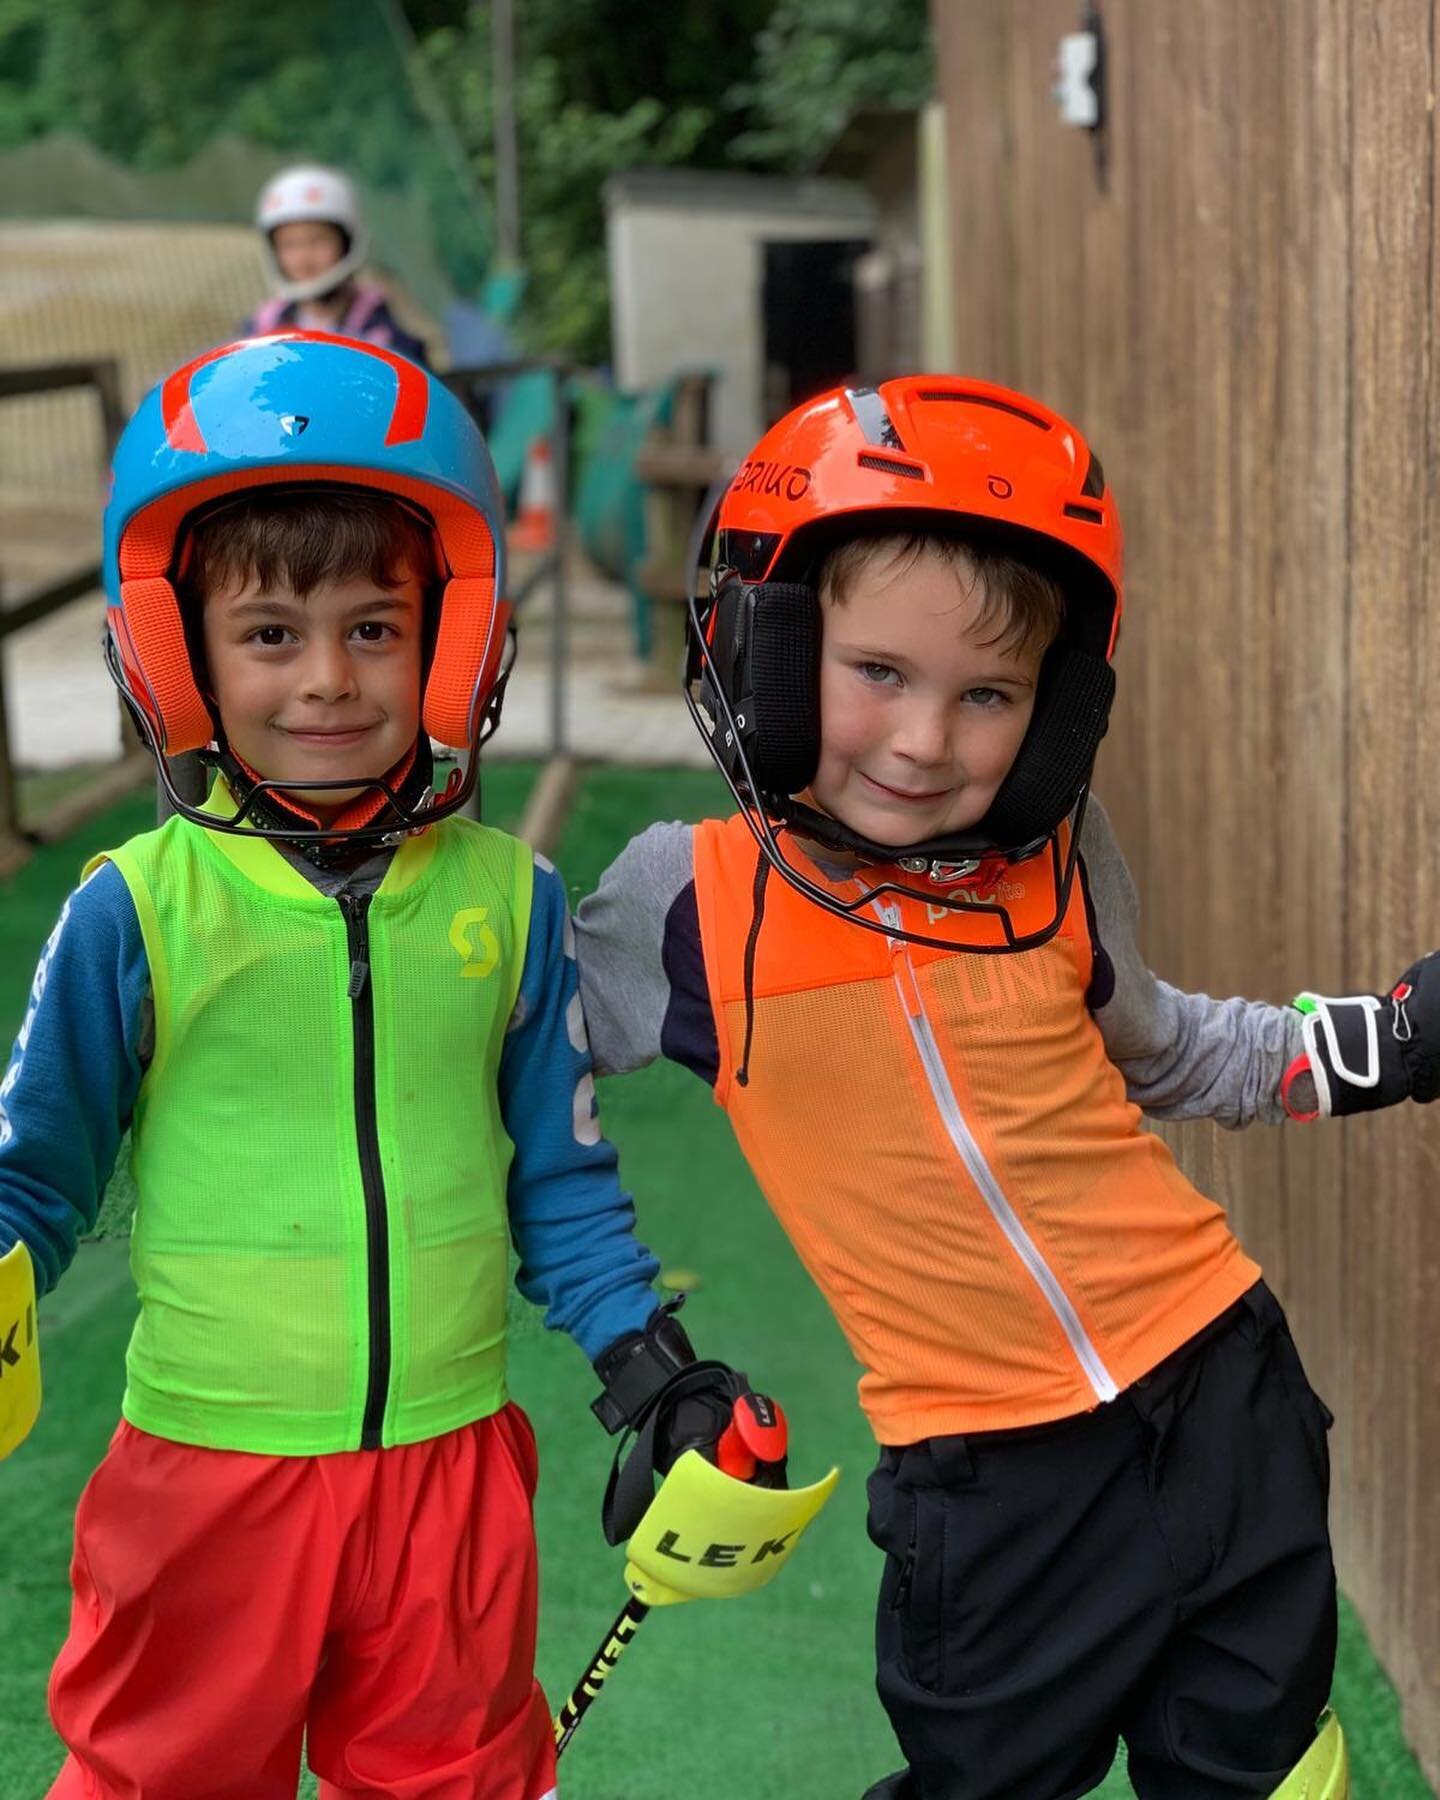 Big smiles and lots of fun on our Brentwood Camp over the weekend
😁😁

Thank you to everyone that joined us! We hope to see all of you again on our future UK summer camps going ahead in the holidays 🙌🏻

Massive thanks to @brentwoodskiandsnowboardc